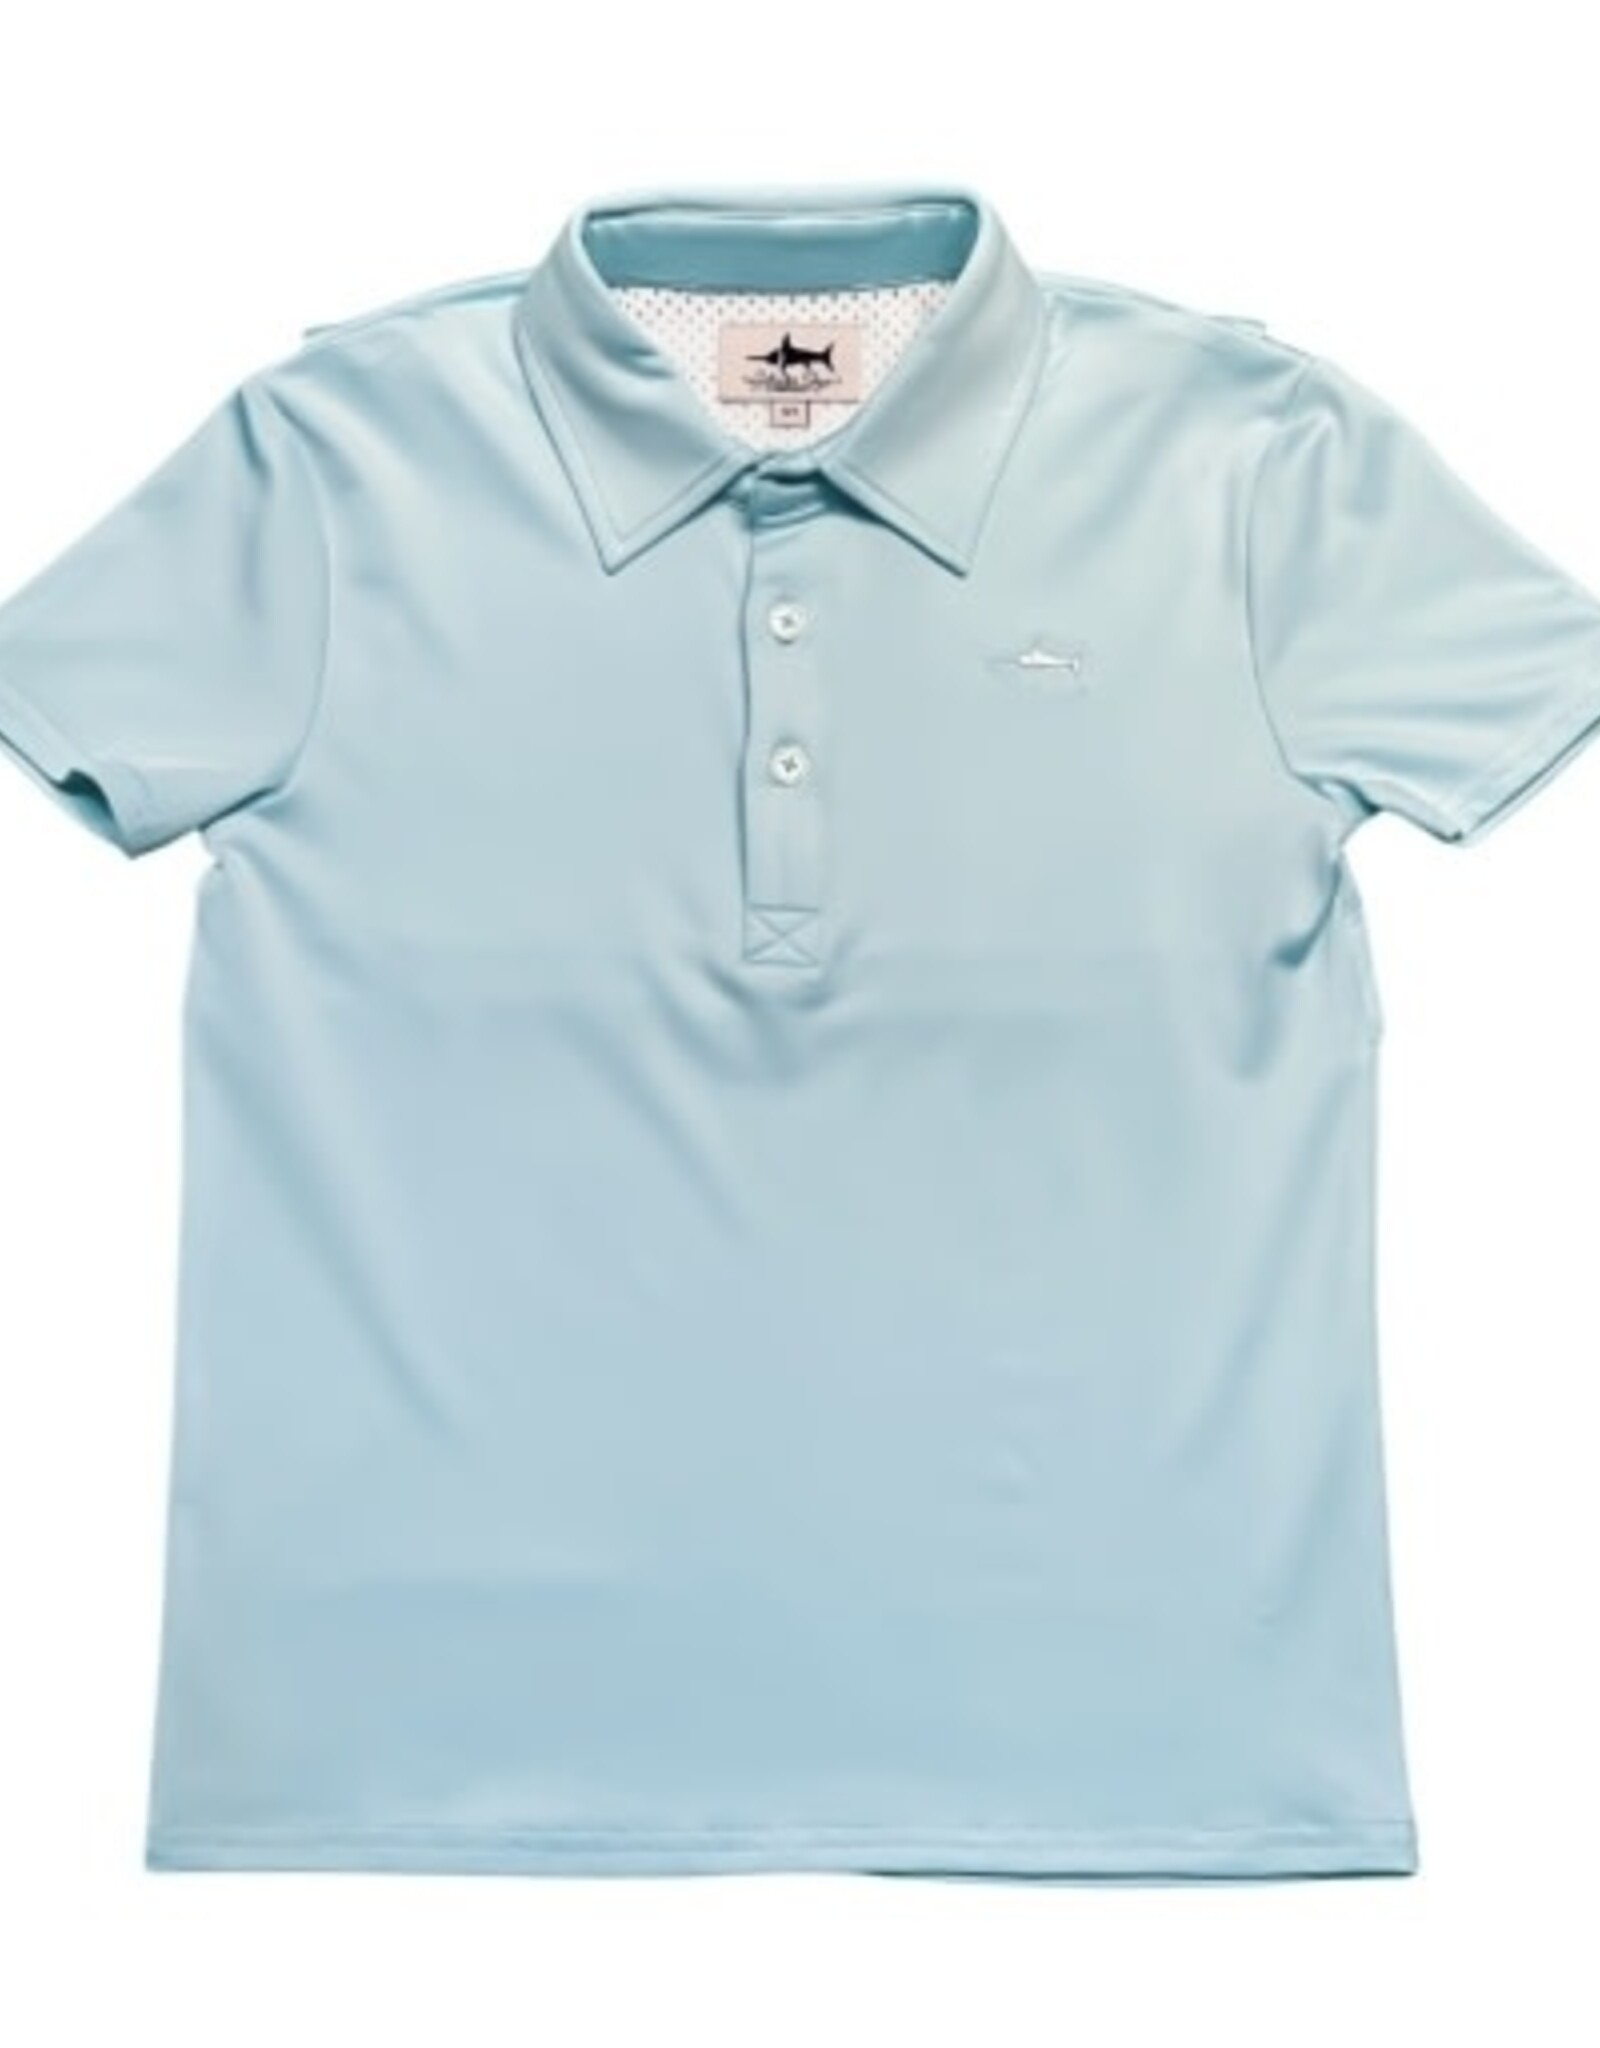 Saltwater Boys Company OFFSHORE PERFORMANCE POLO